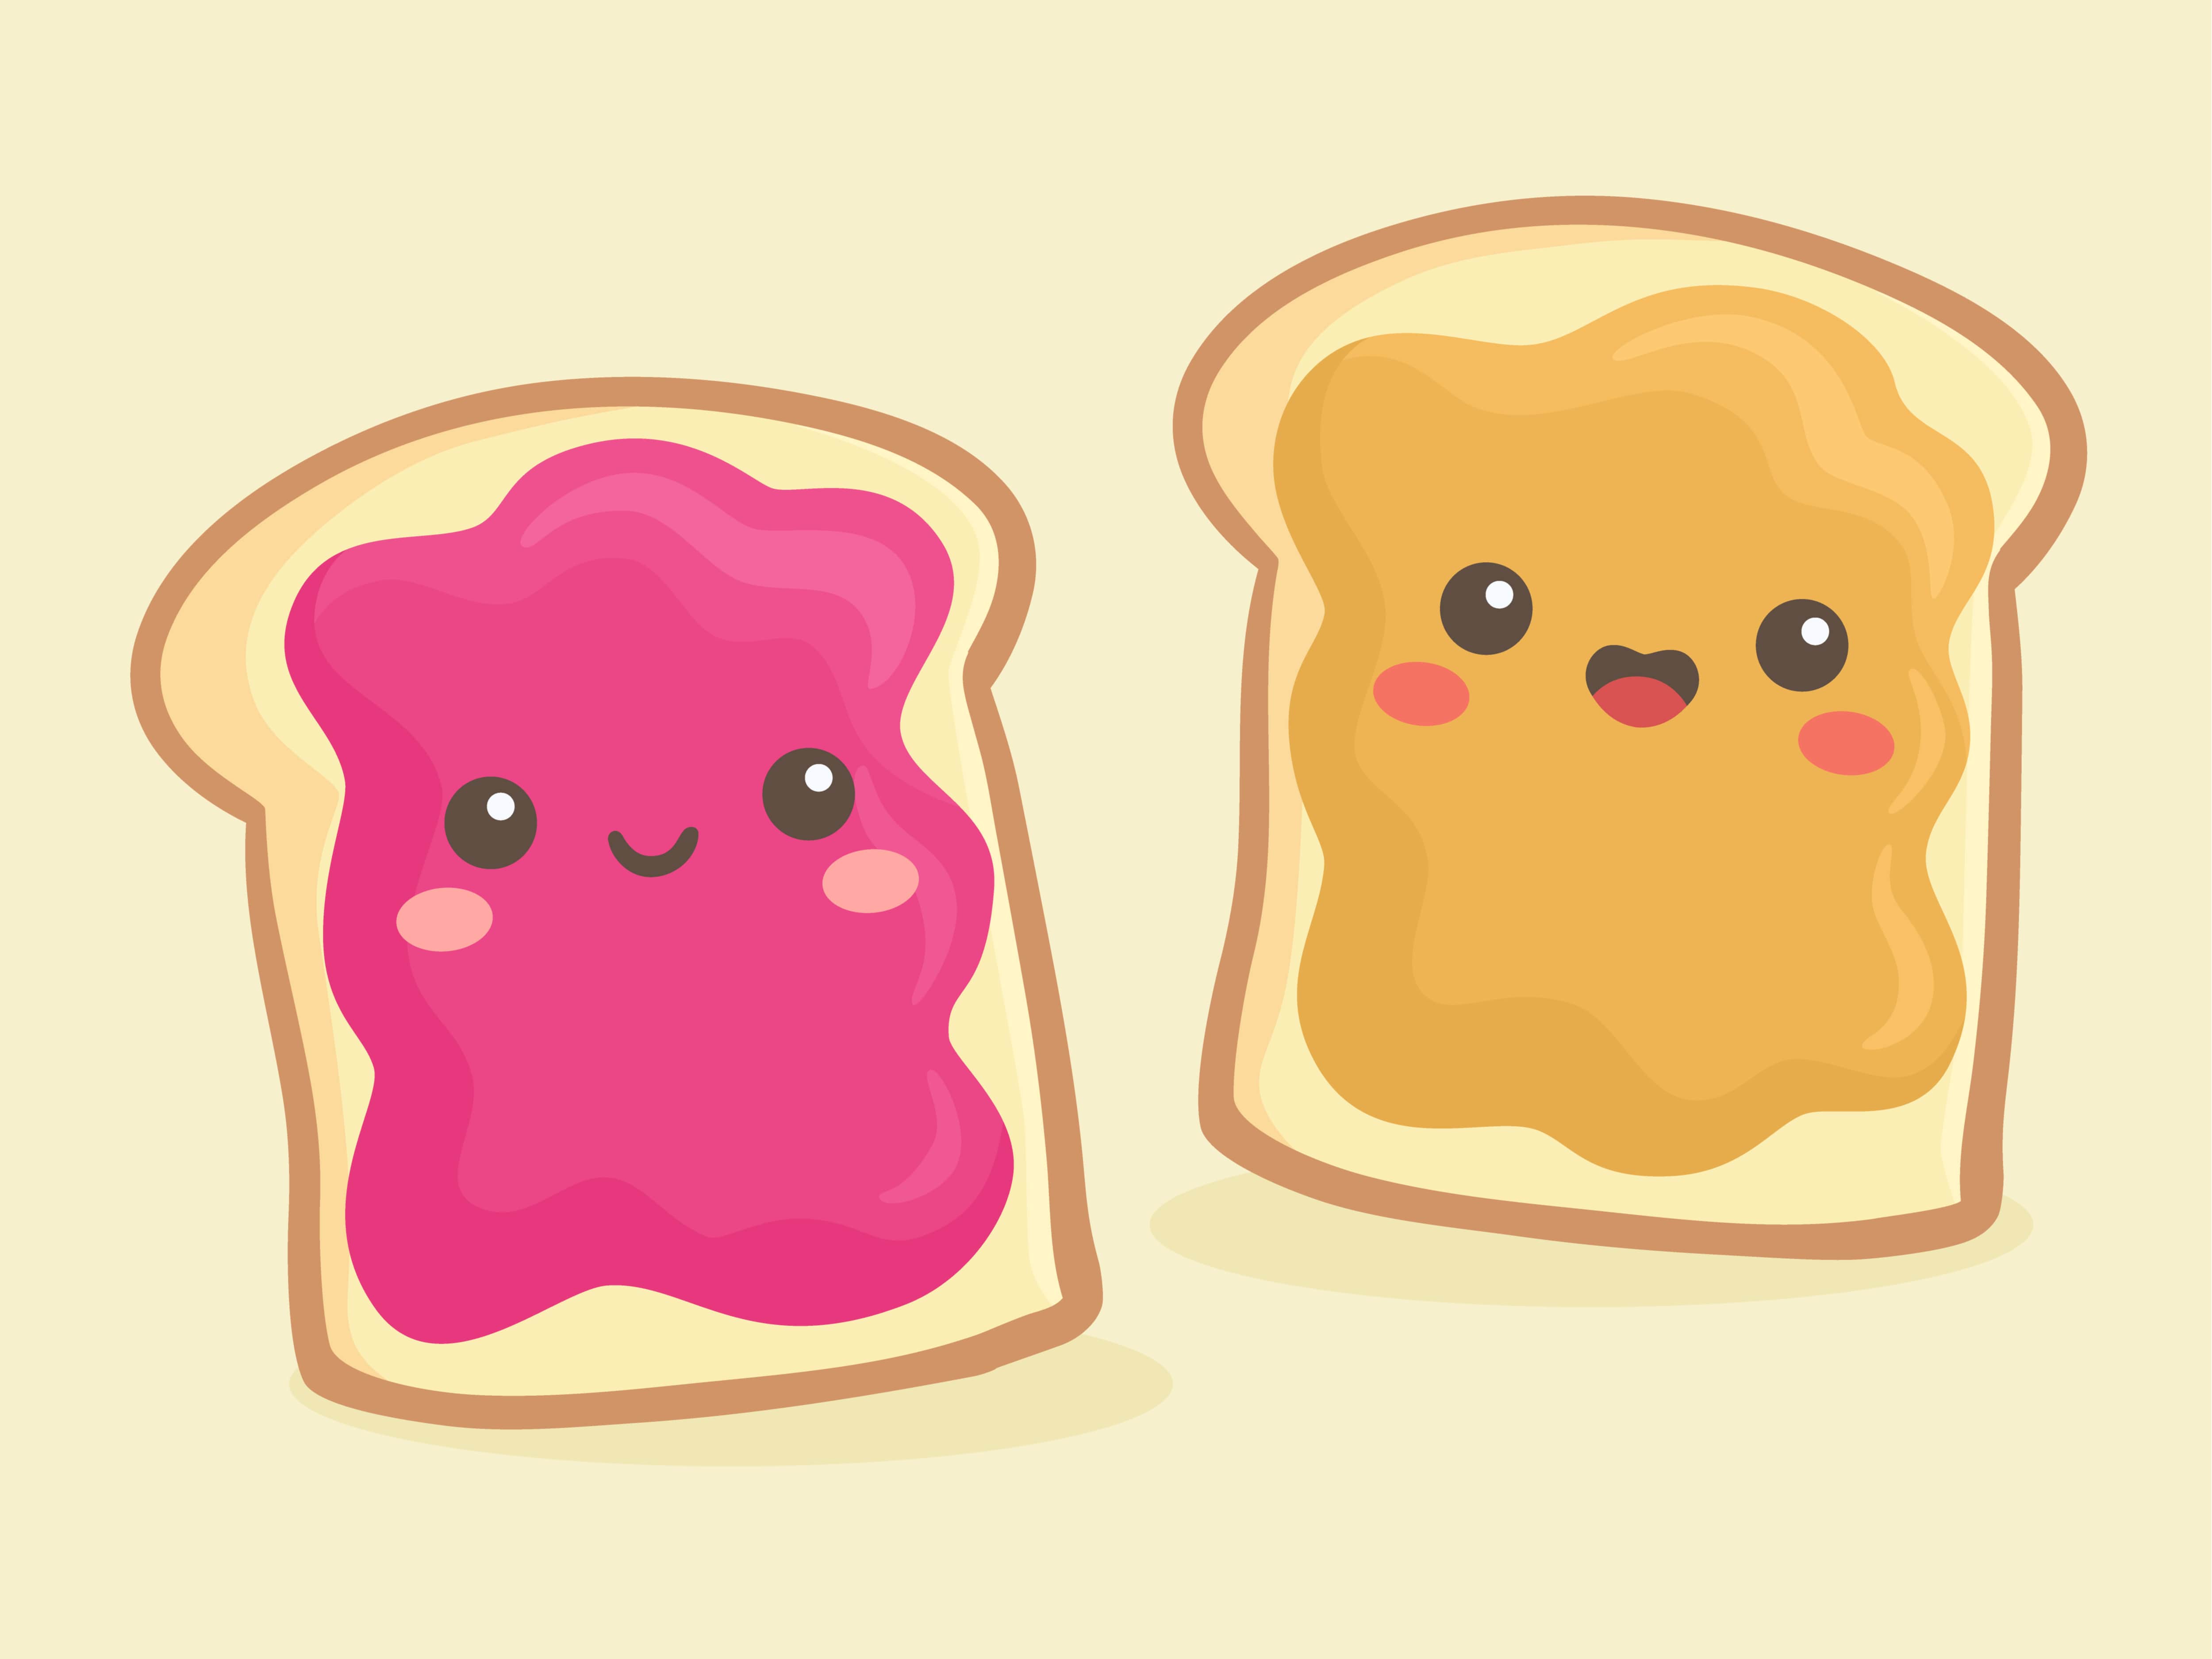 peanut butter and jelly cartoon